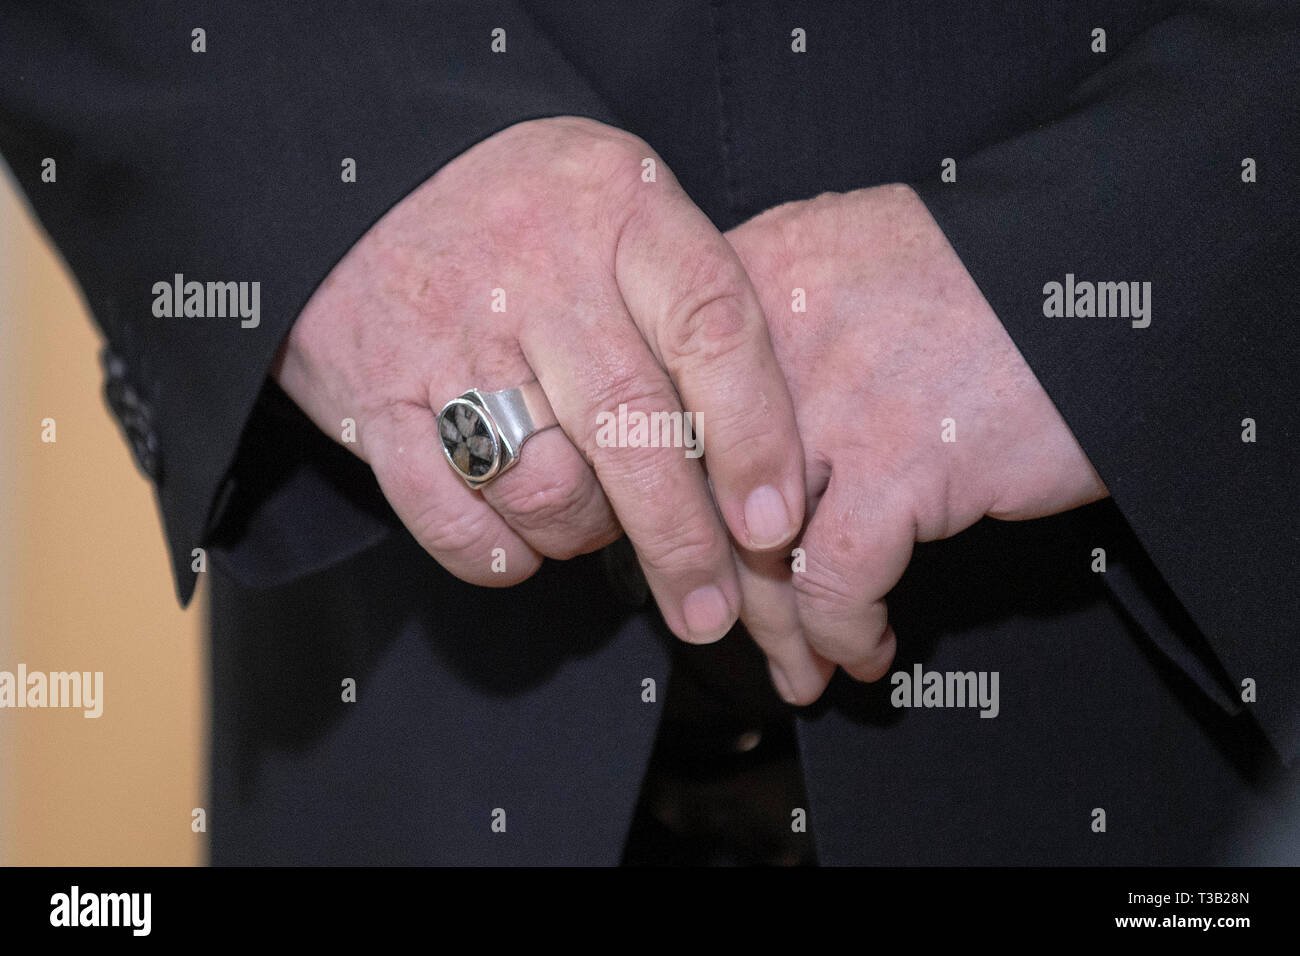 Hands of Cardinal Reinhard MARX (Archbishop of Munich, Munchen, and Freising)  with the Cardinal's Ring, ring; Insignia; Spring General Assembly of the  German Bishops' Conference from 11 to 14 March 2019 in